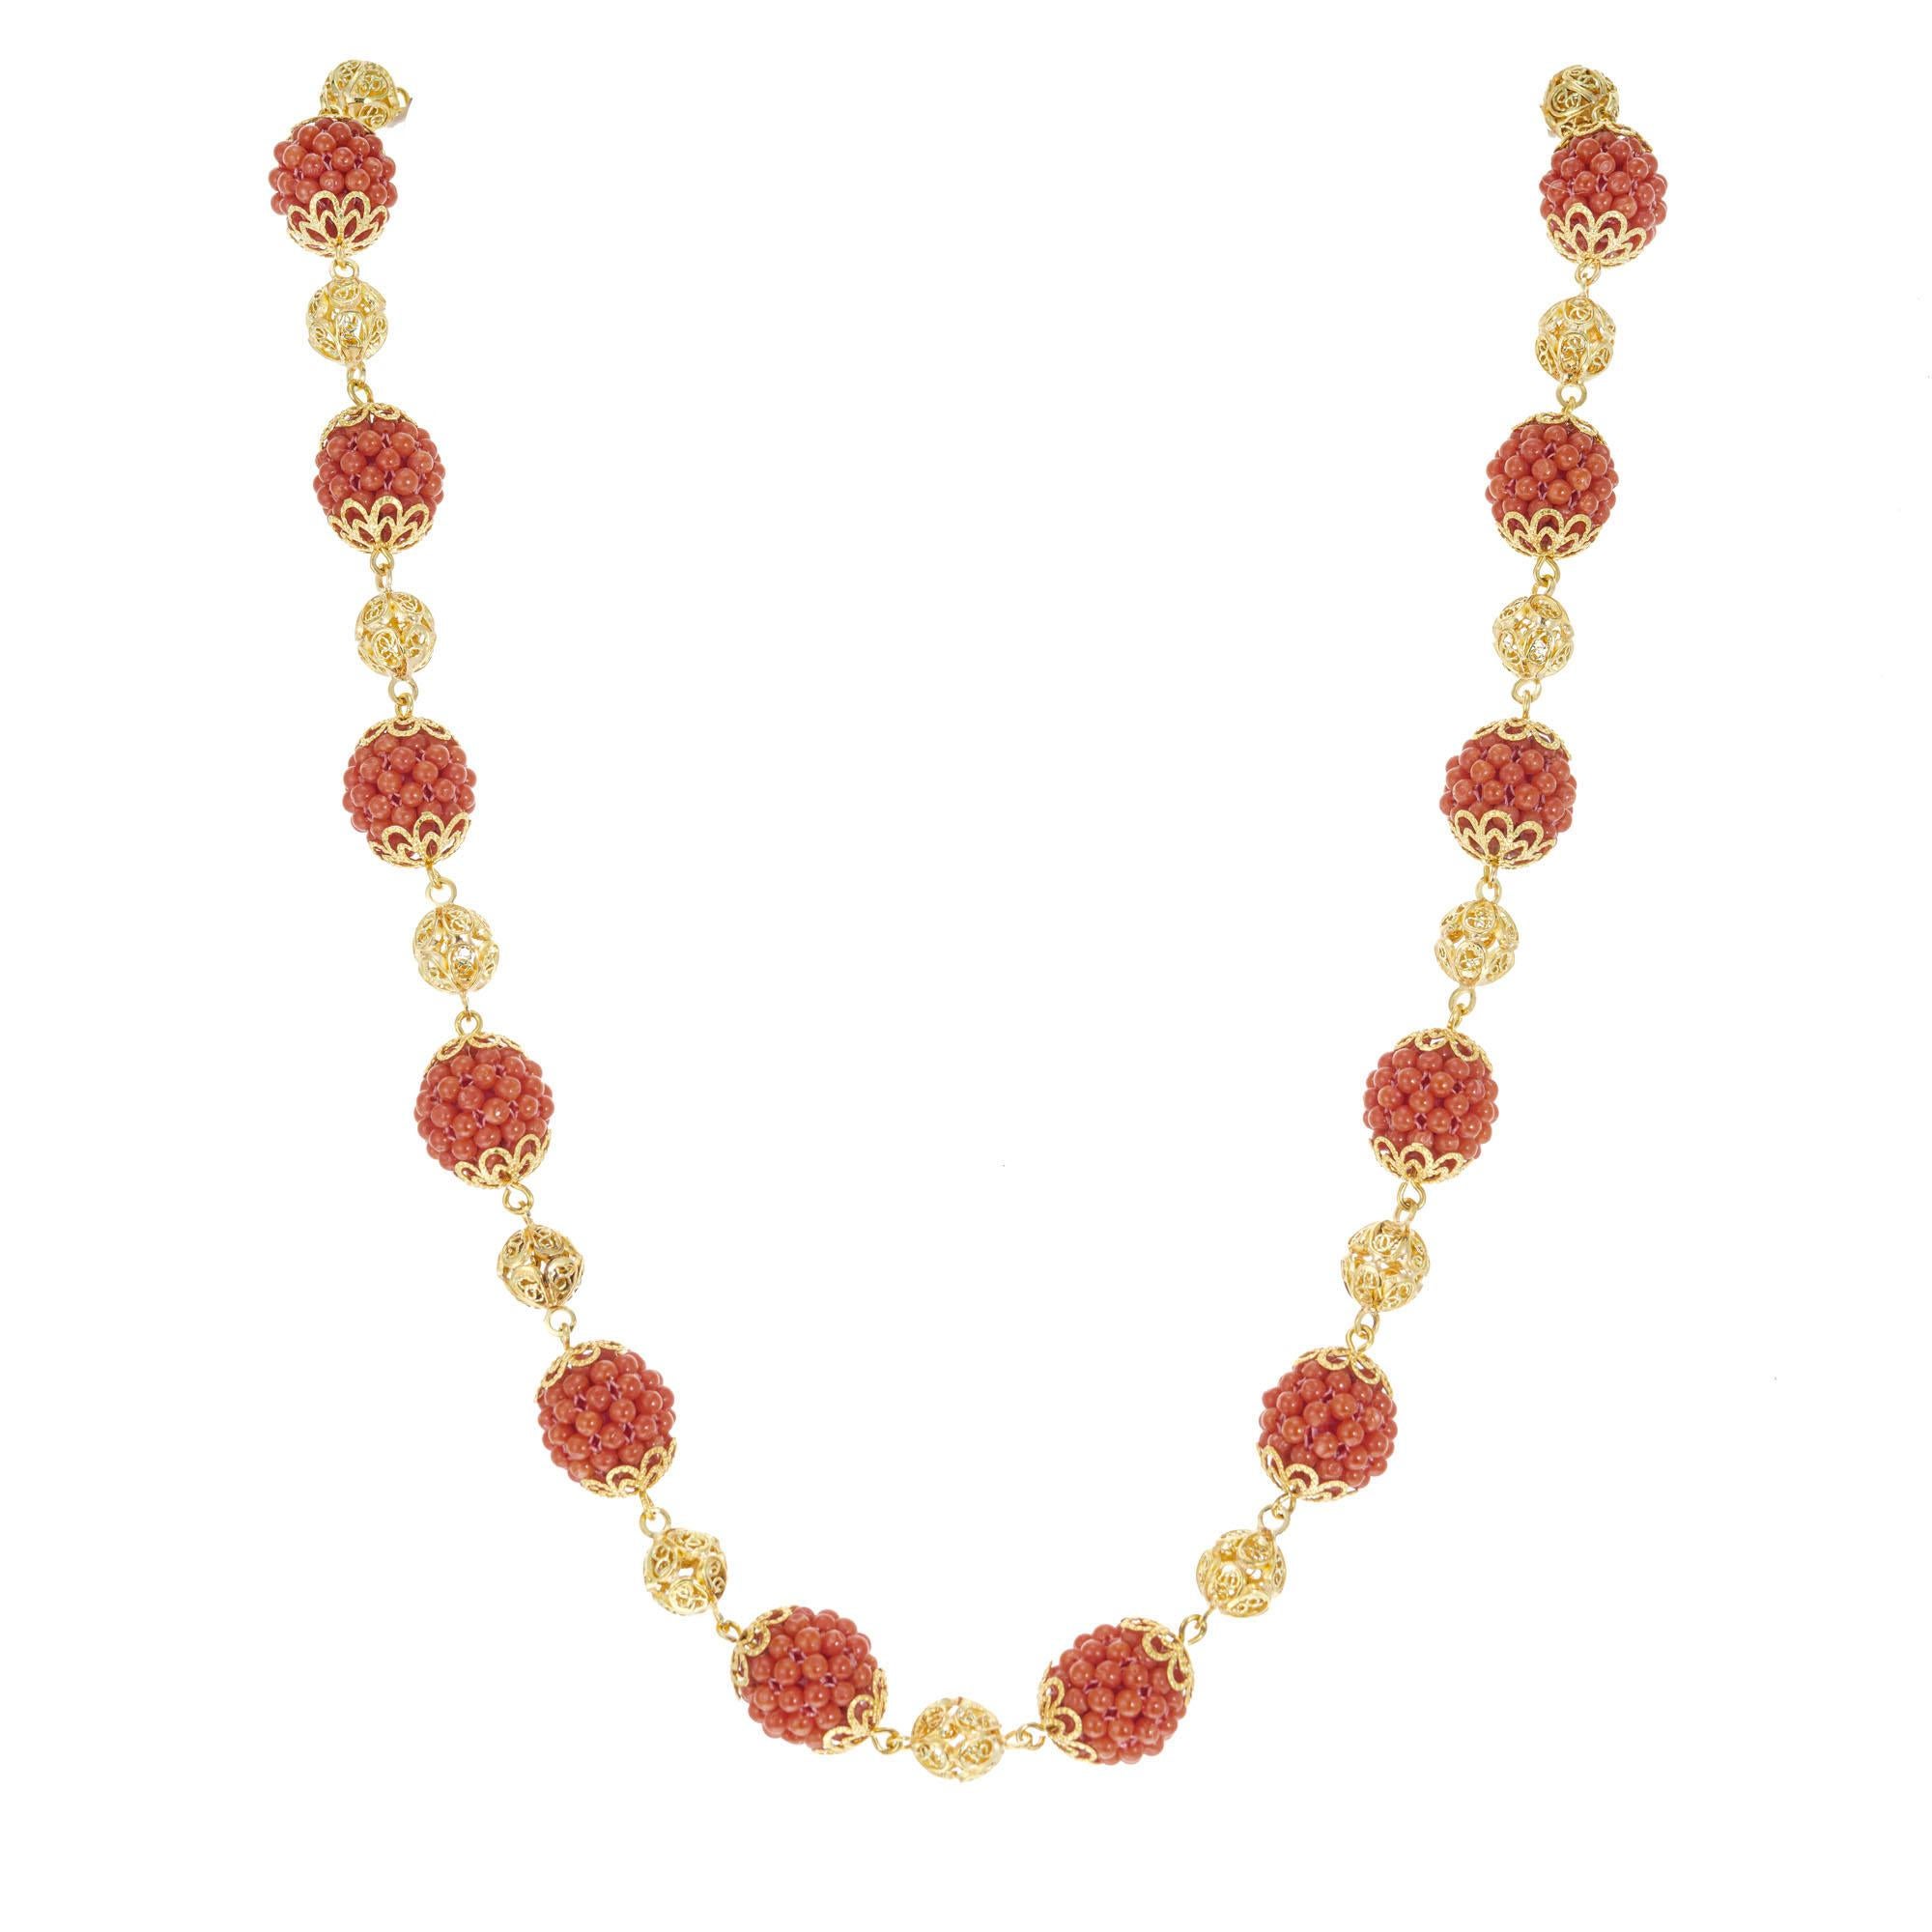 Vintage 1960's coral bead necklace with 16 sections of small GIA certified natural orange/red coral beads, spaced by open work yellow gold balls.  19.5 inches in length 

16 orangey red coral beaded balls, 2.7mm GIA Certificate # 6217688814
18k